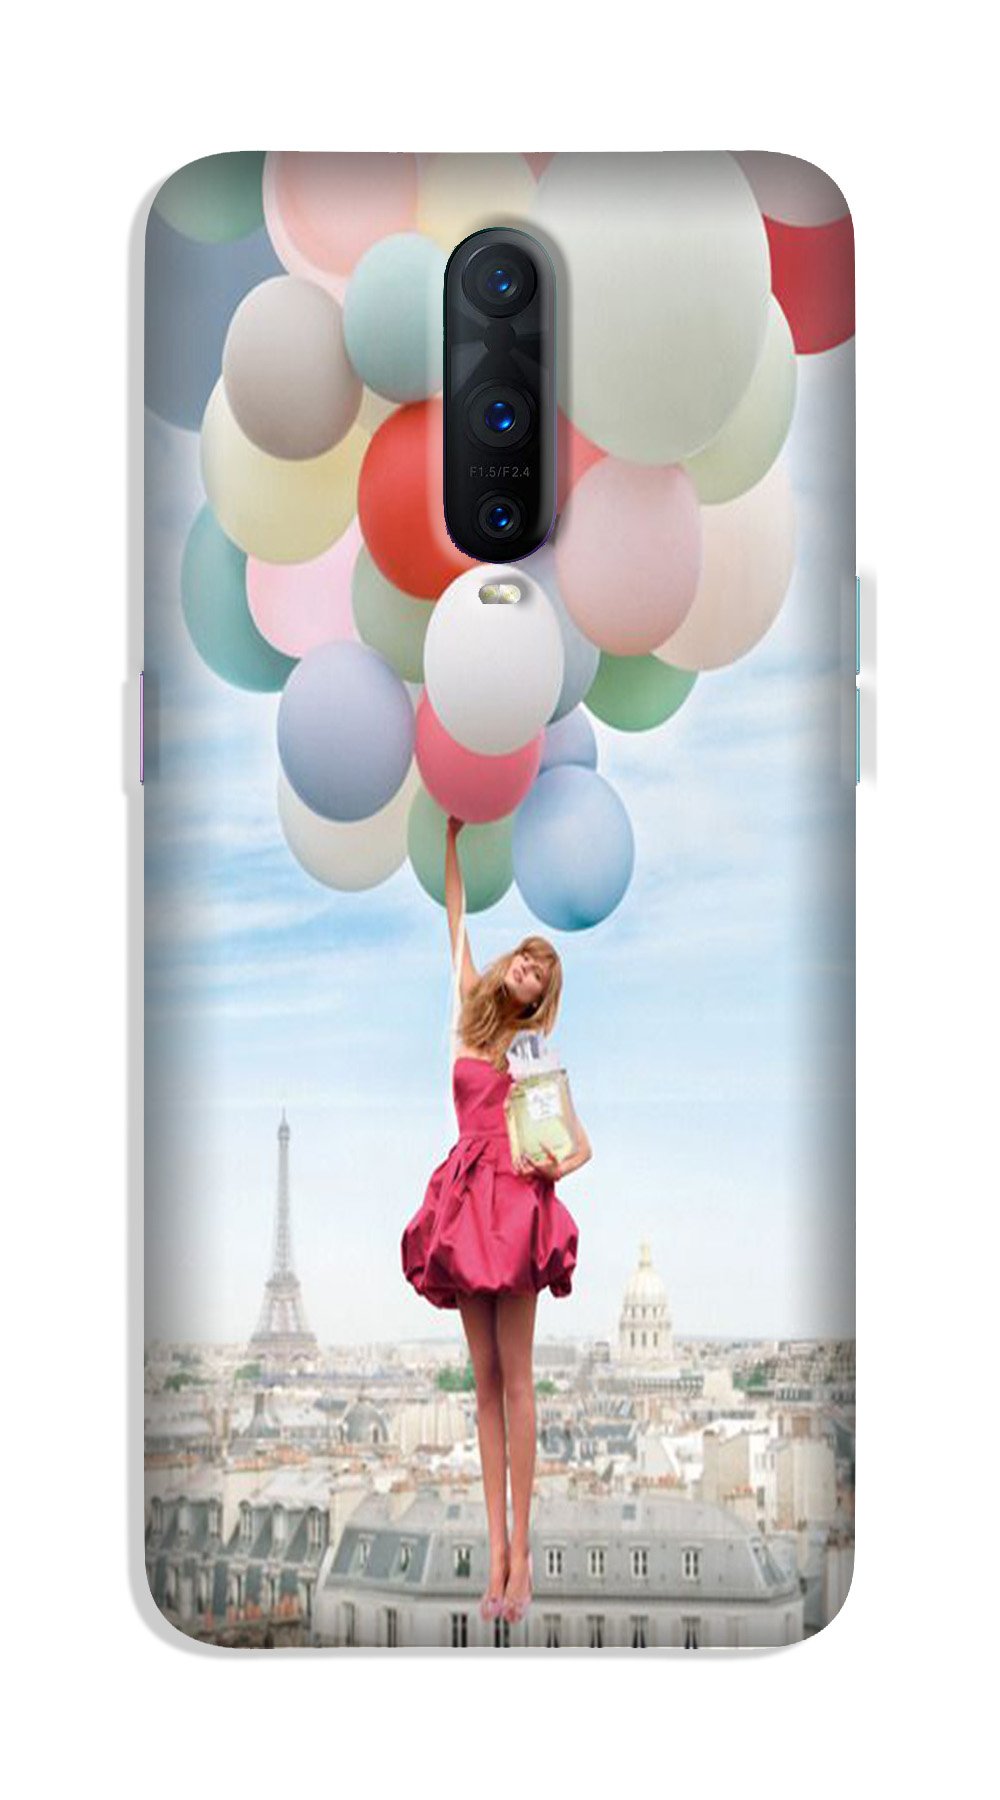 Girl with Baloon Case for OnePlus 7 Pro